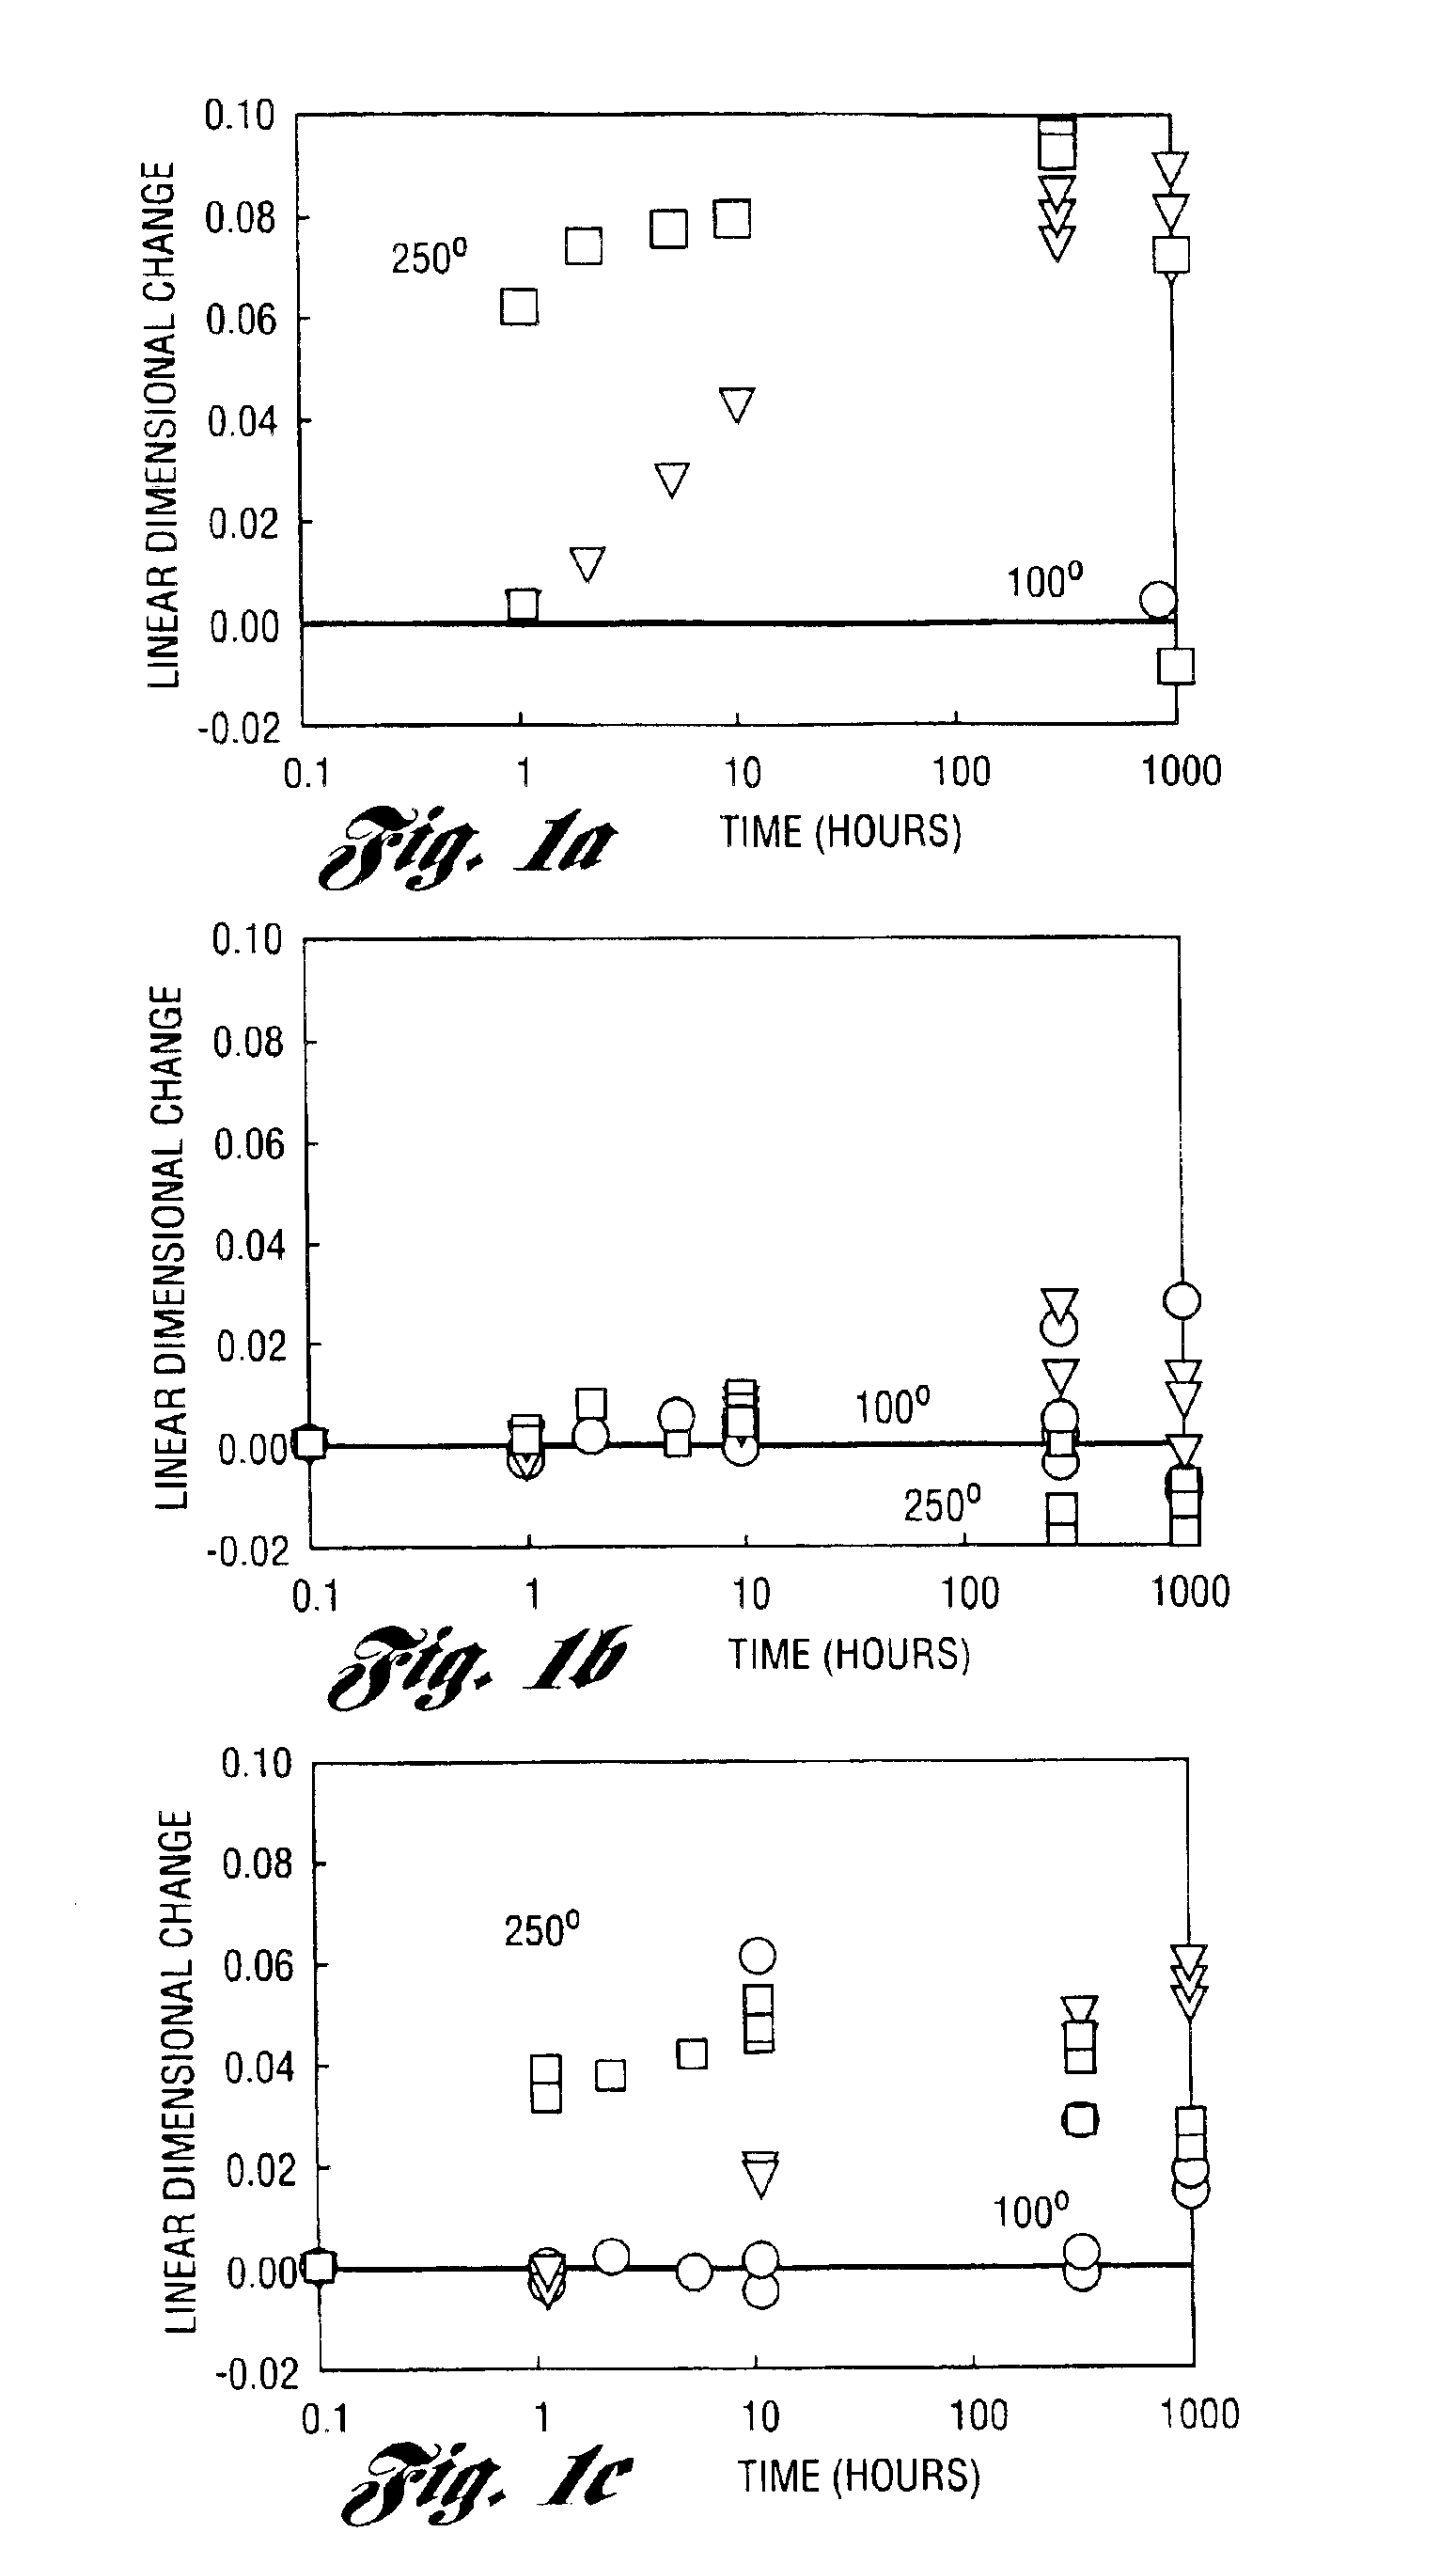 Method of optimizing heat treatment of alloys by predicting thermal growth